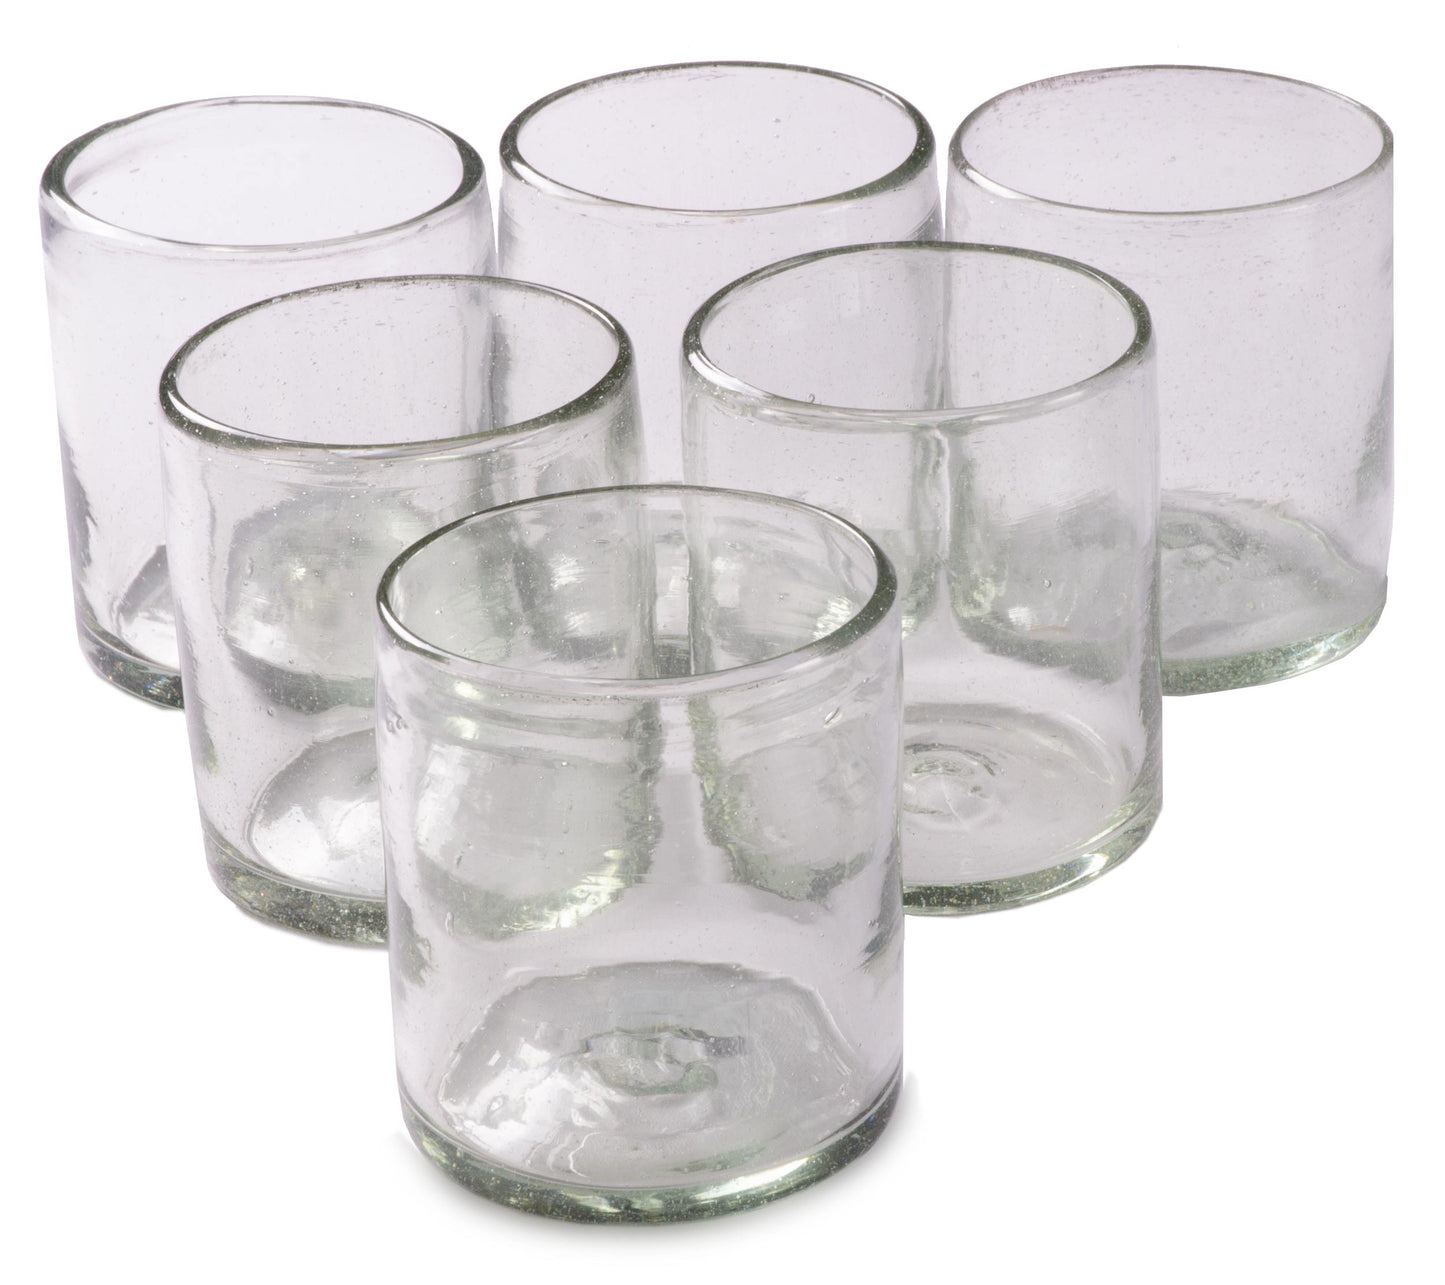 Orion Mexican Glassware Natural 12 oz All Purpose - Set of 6